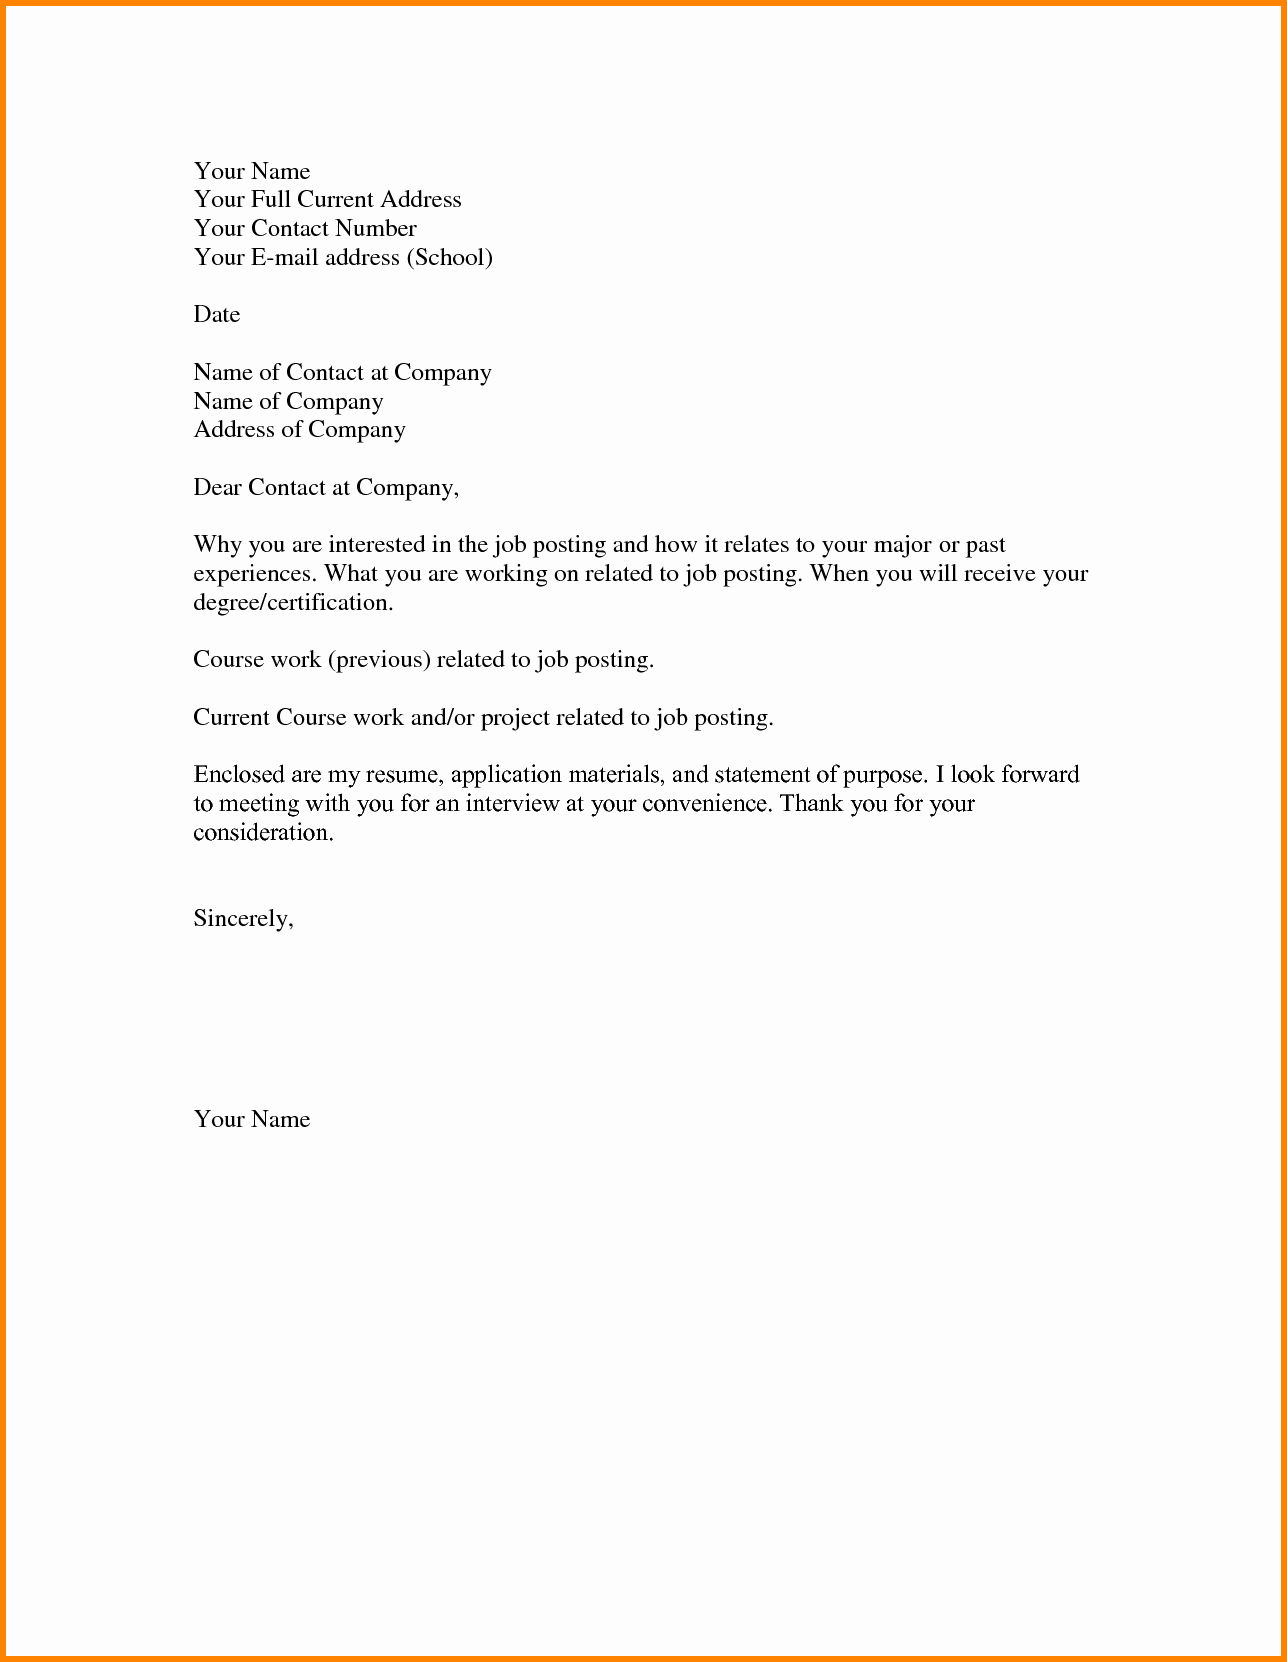 Simple Cover Letter format Beautiful 8 Example Of A Simple Applicatuon Letter